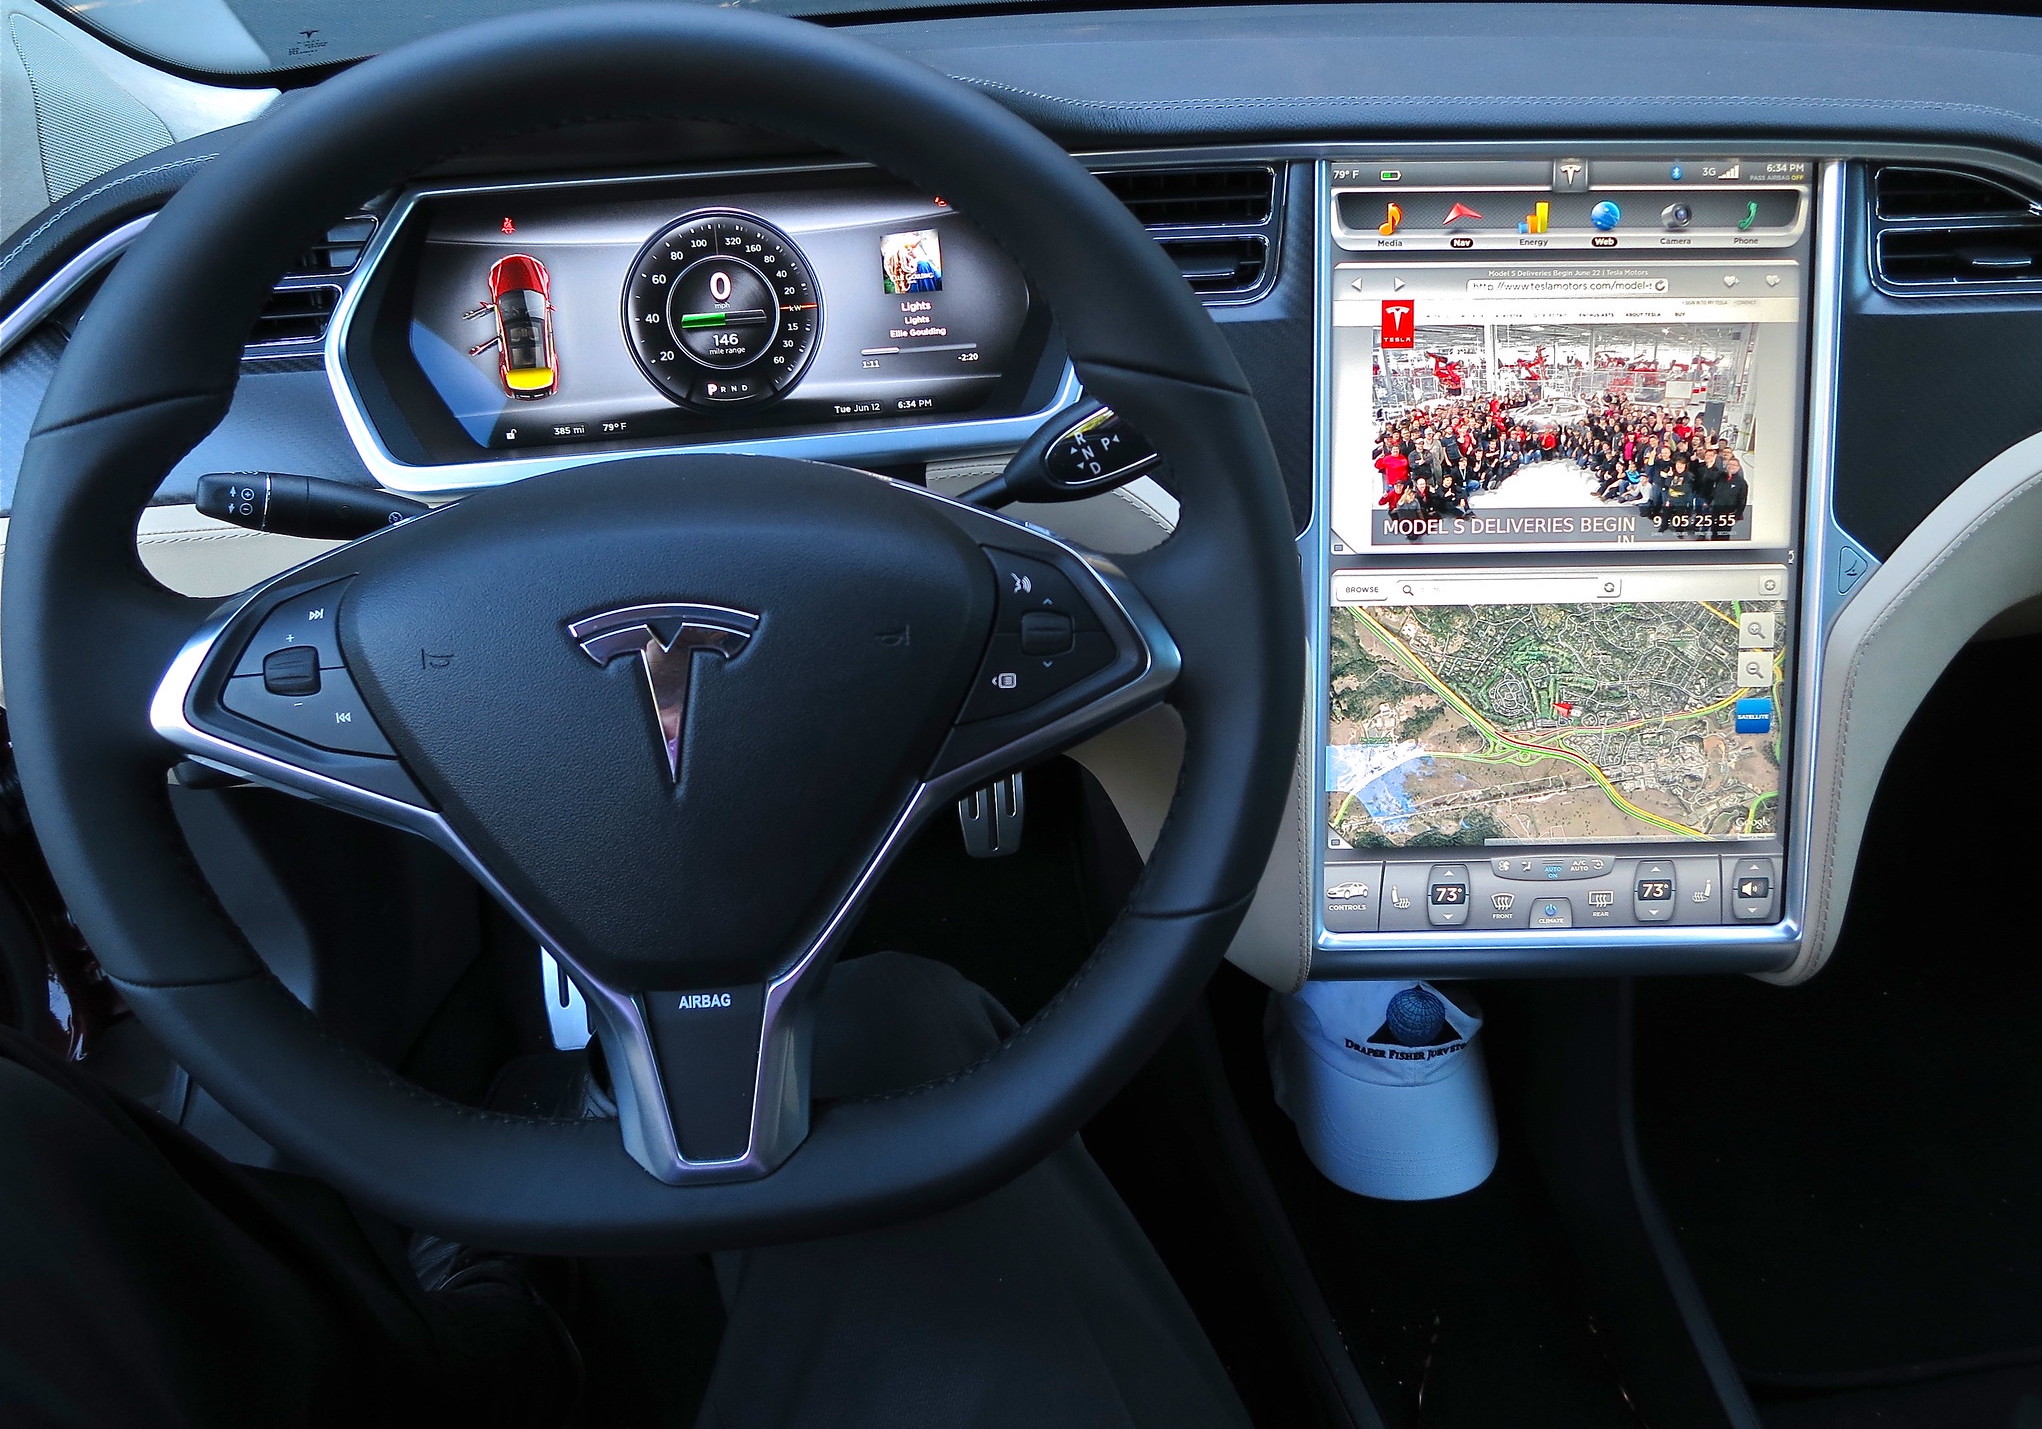 AM-radio-act-vs-automakers-tesla-ford-volkswagen